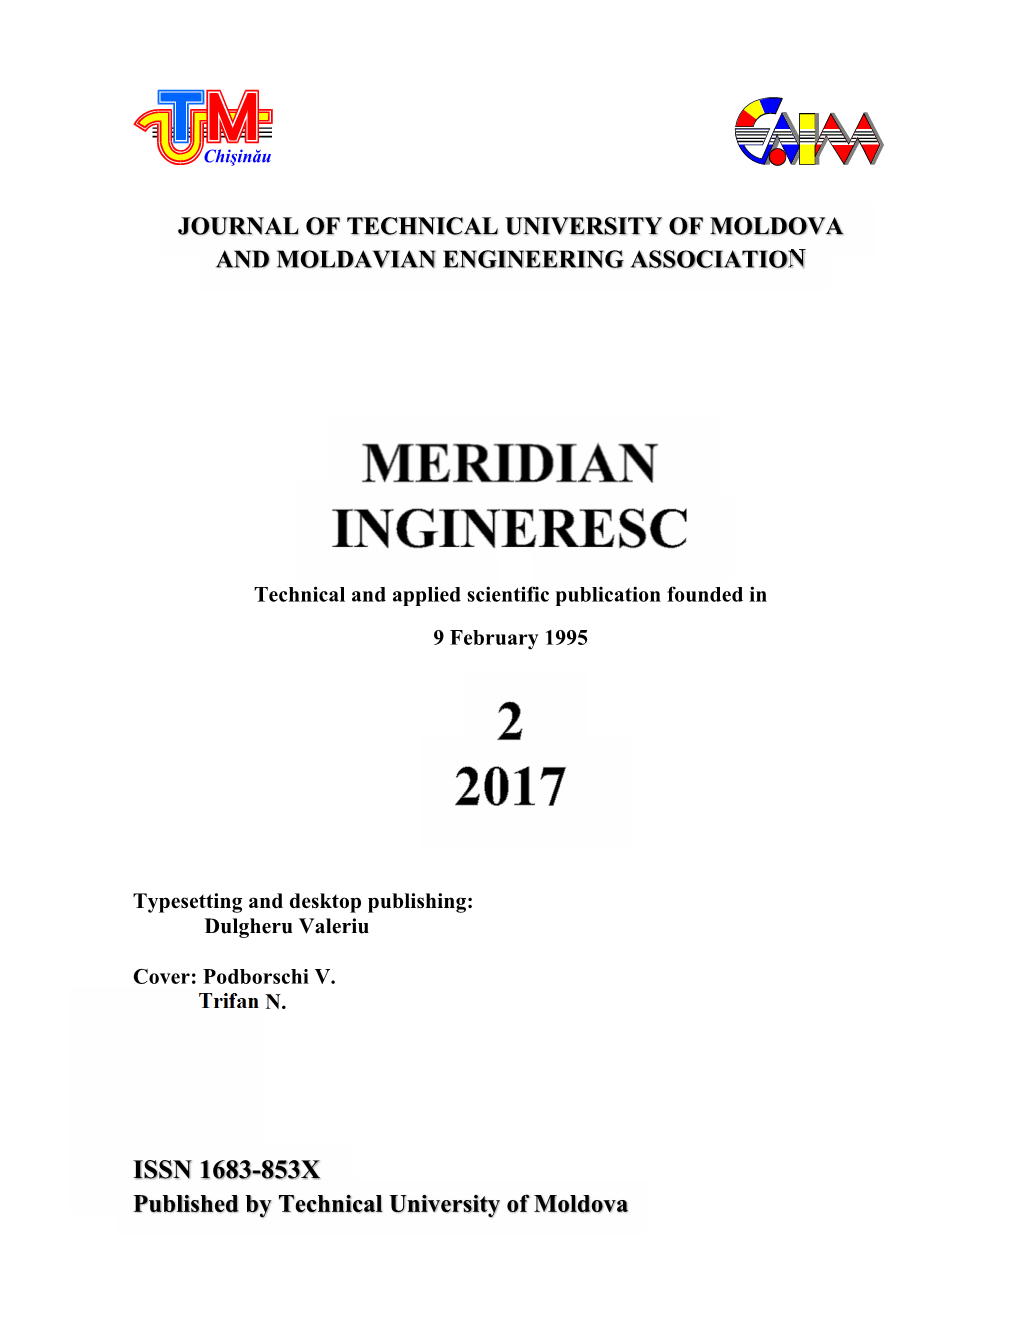 ISSN 1683-853X Published by Technical University of Moldova 2